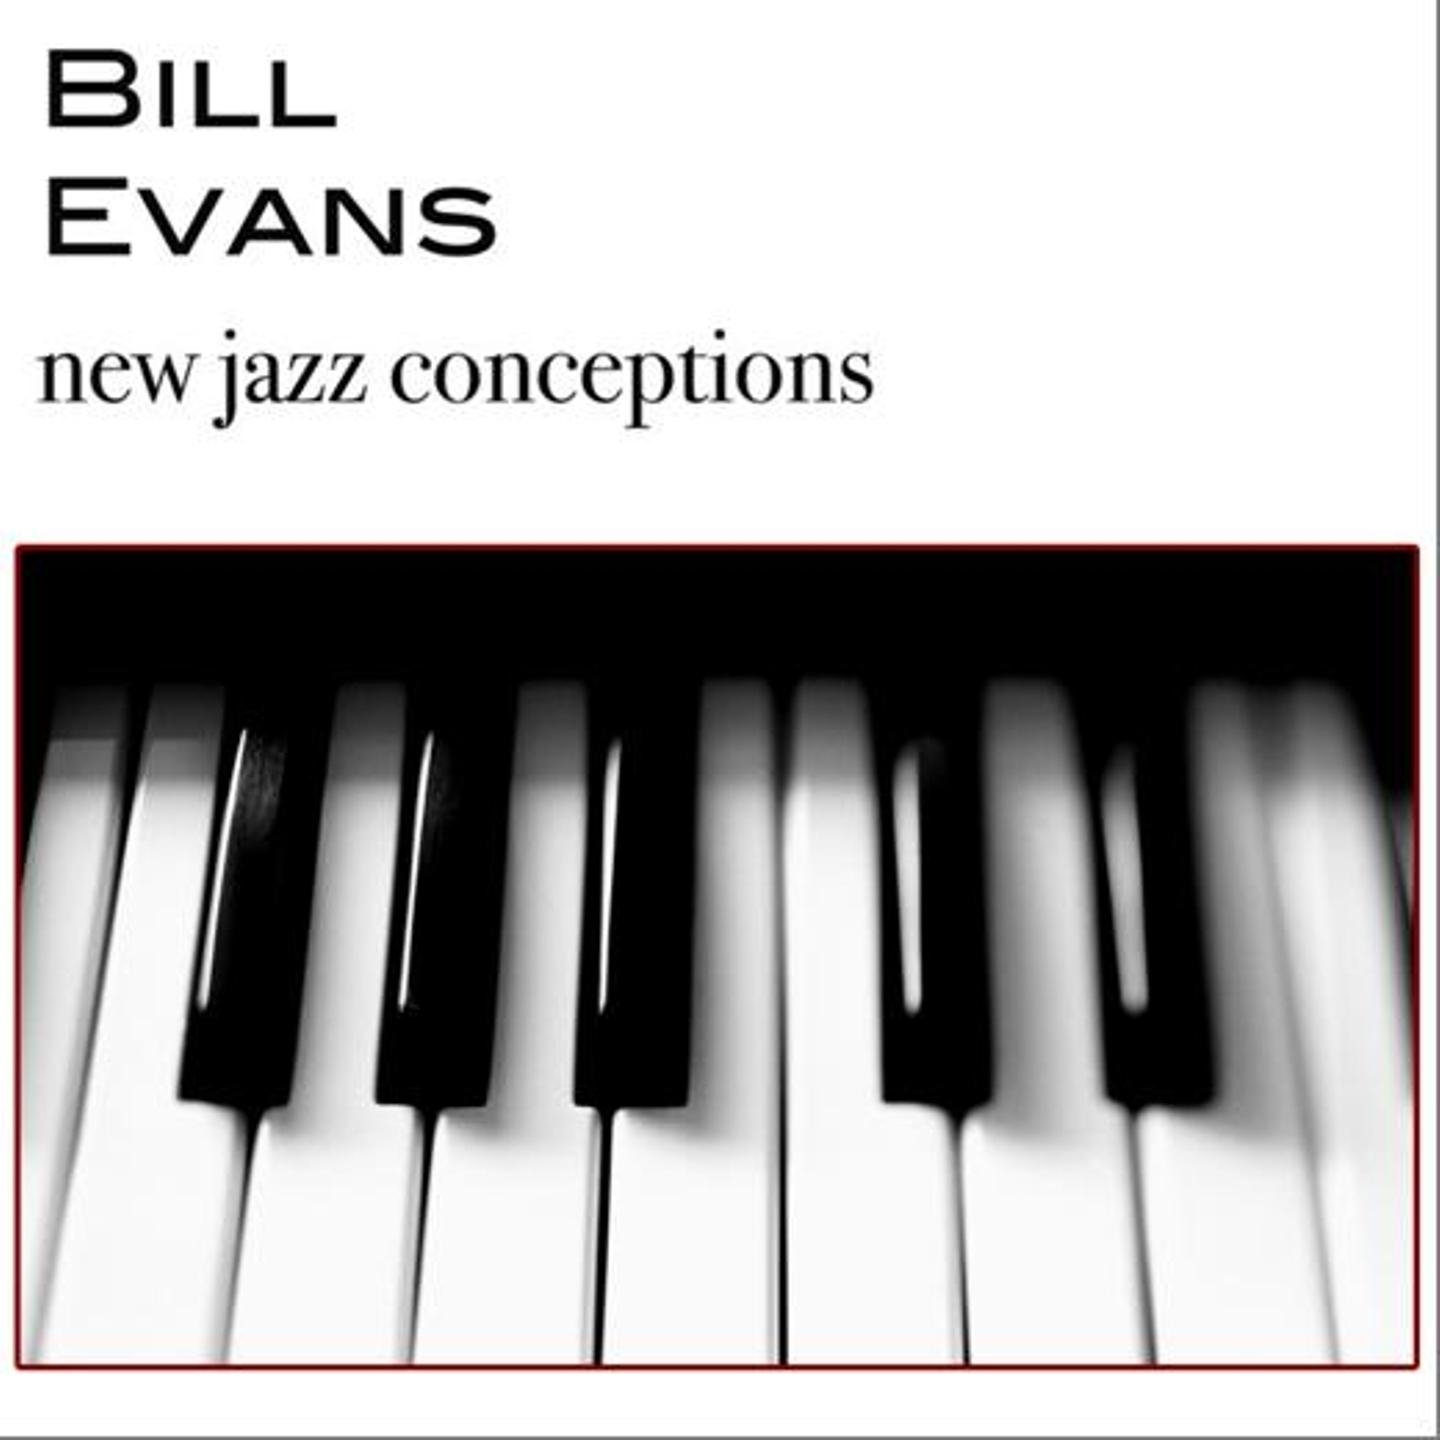 New Jazz Conceptions (New Jazz Conception, Deluxe Version)